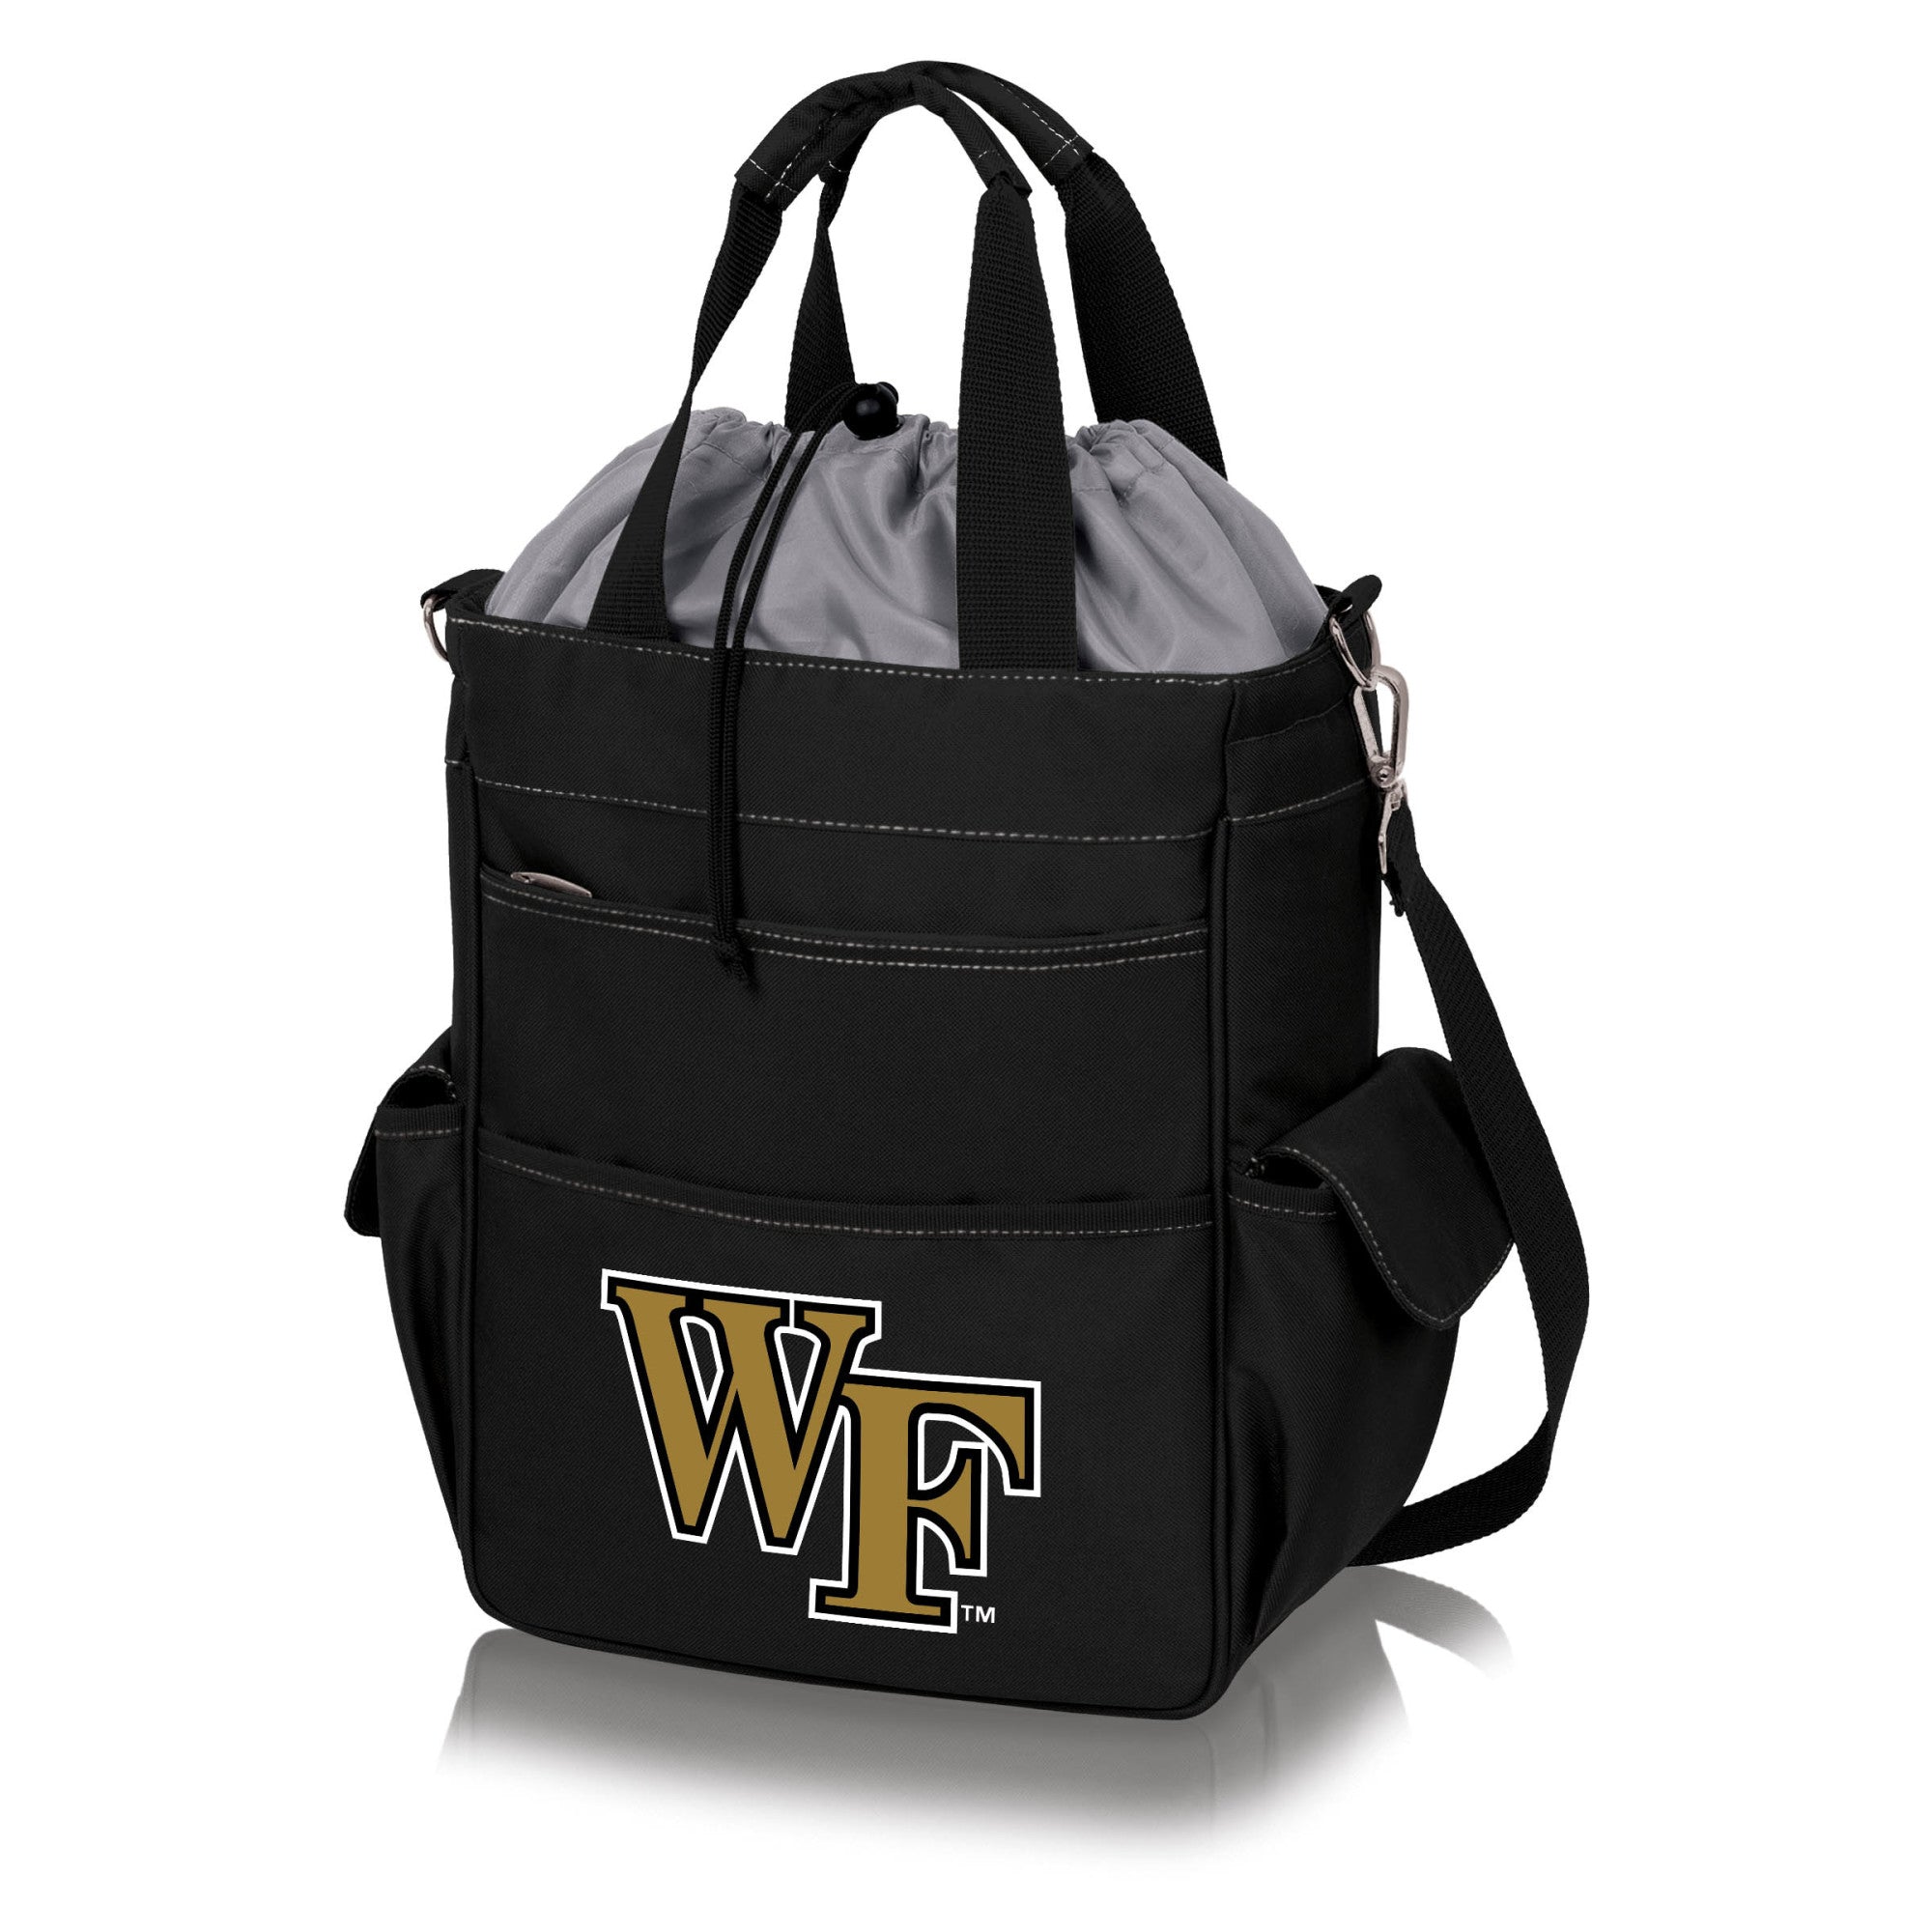 Wake Forest Demon Deacons - Activo Cooler Tote Bag, (Black with Gray Accents)